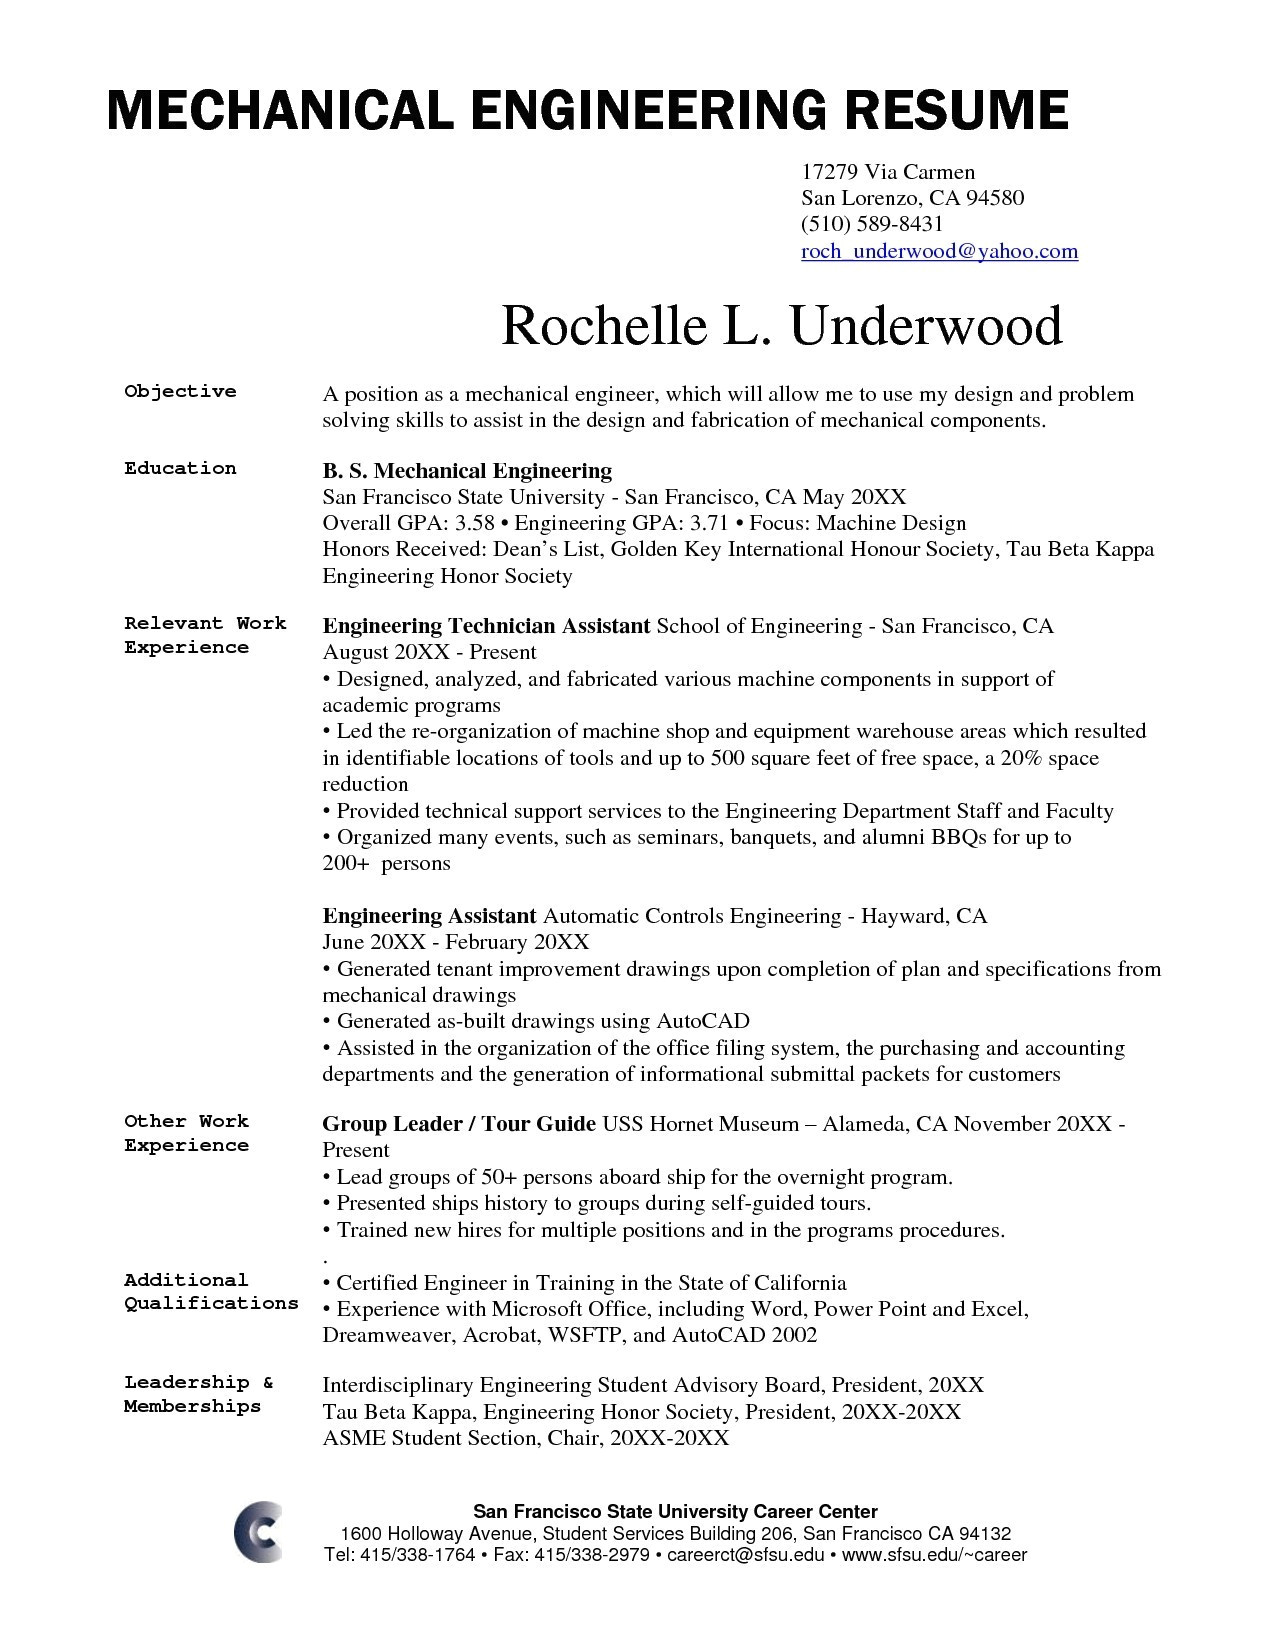 Resume Templates For Engineers